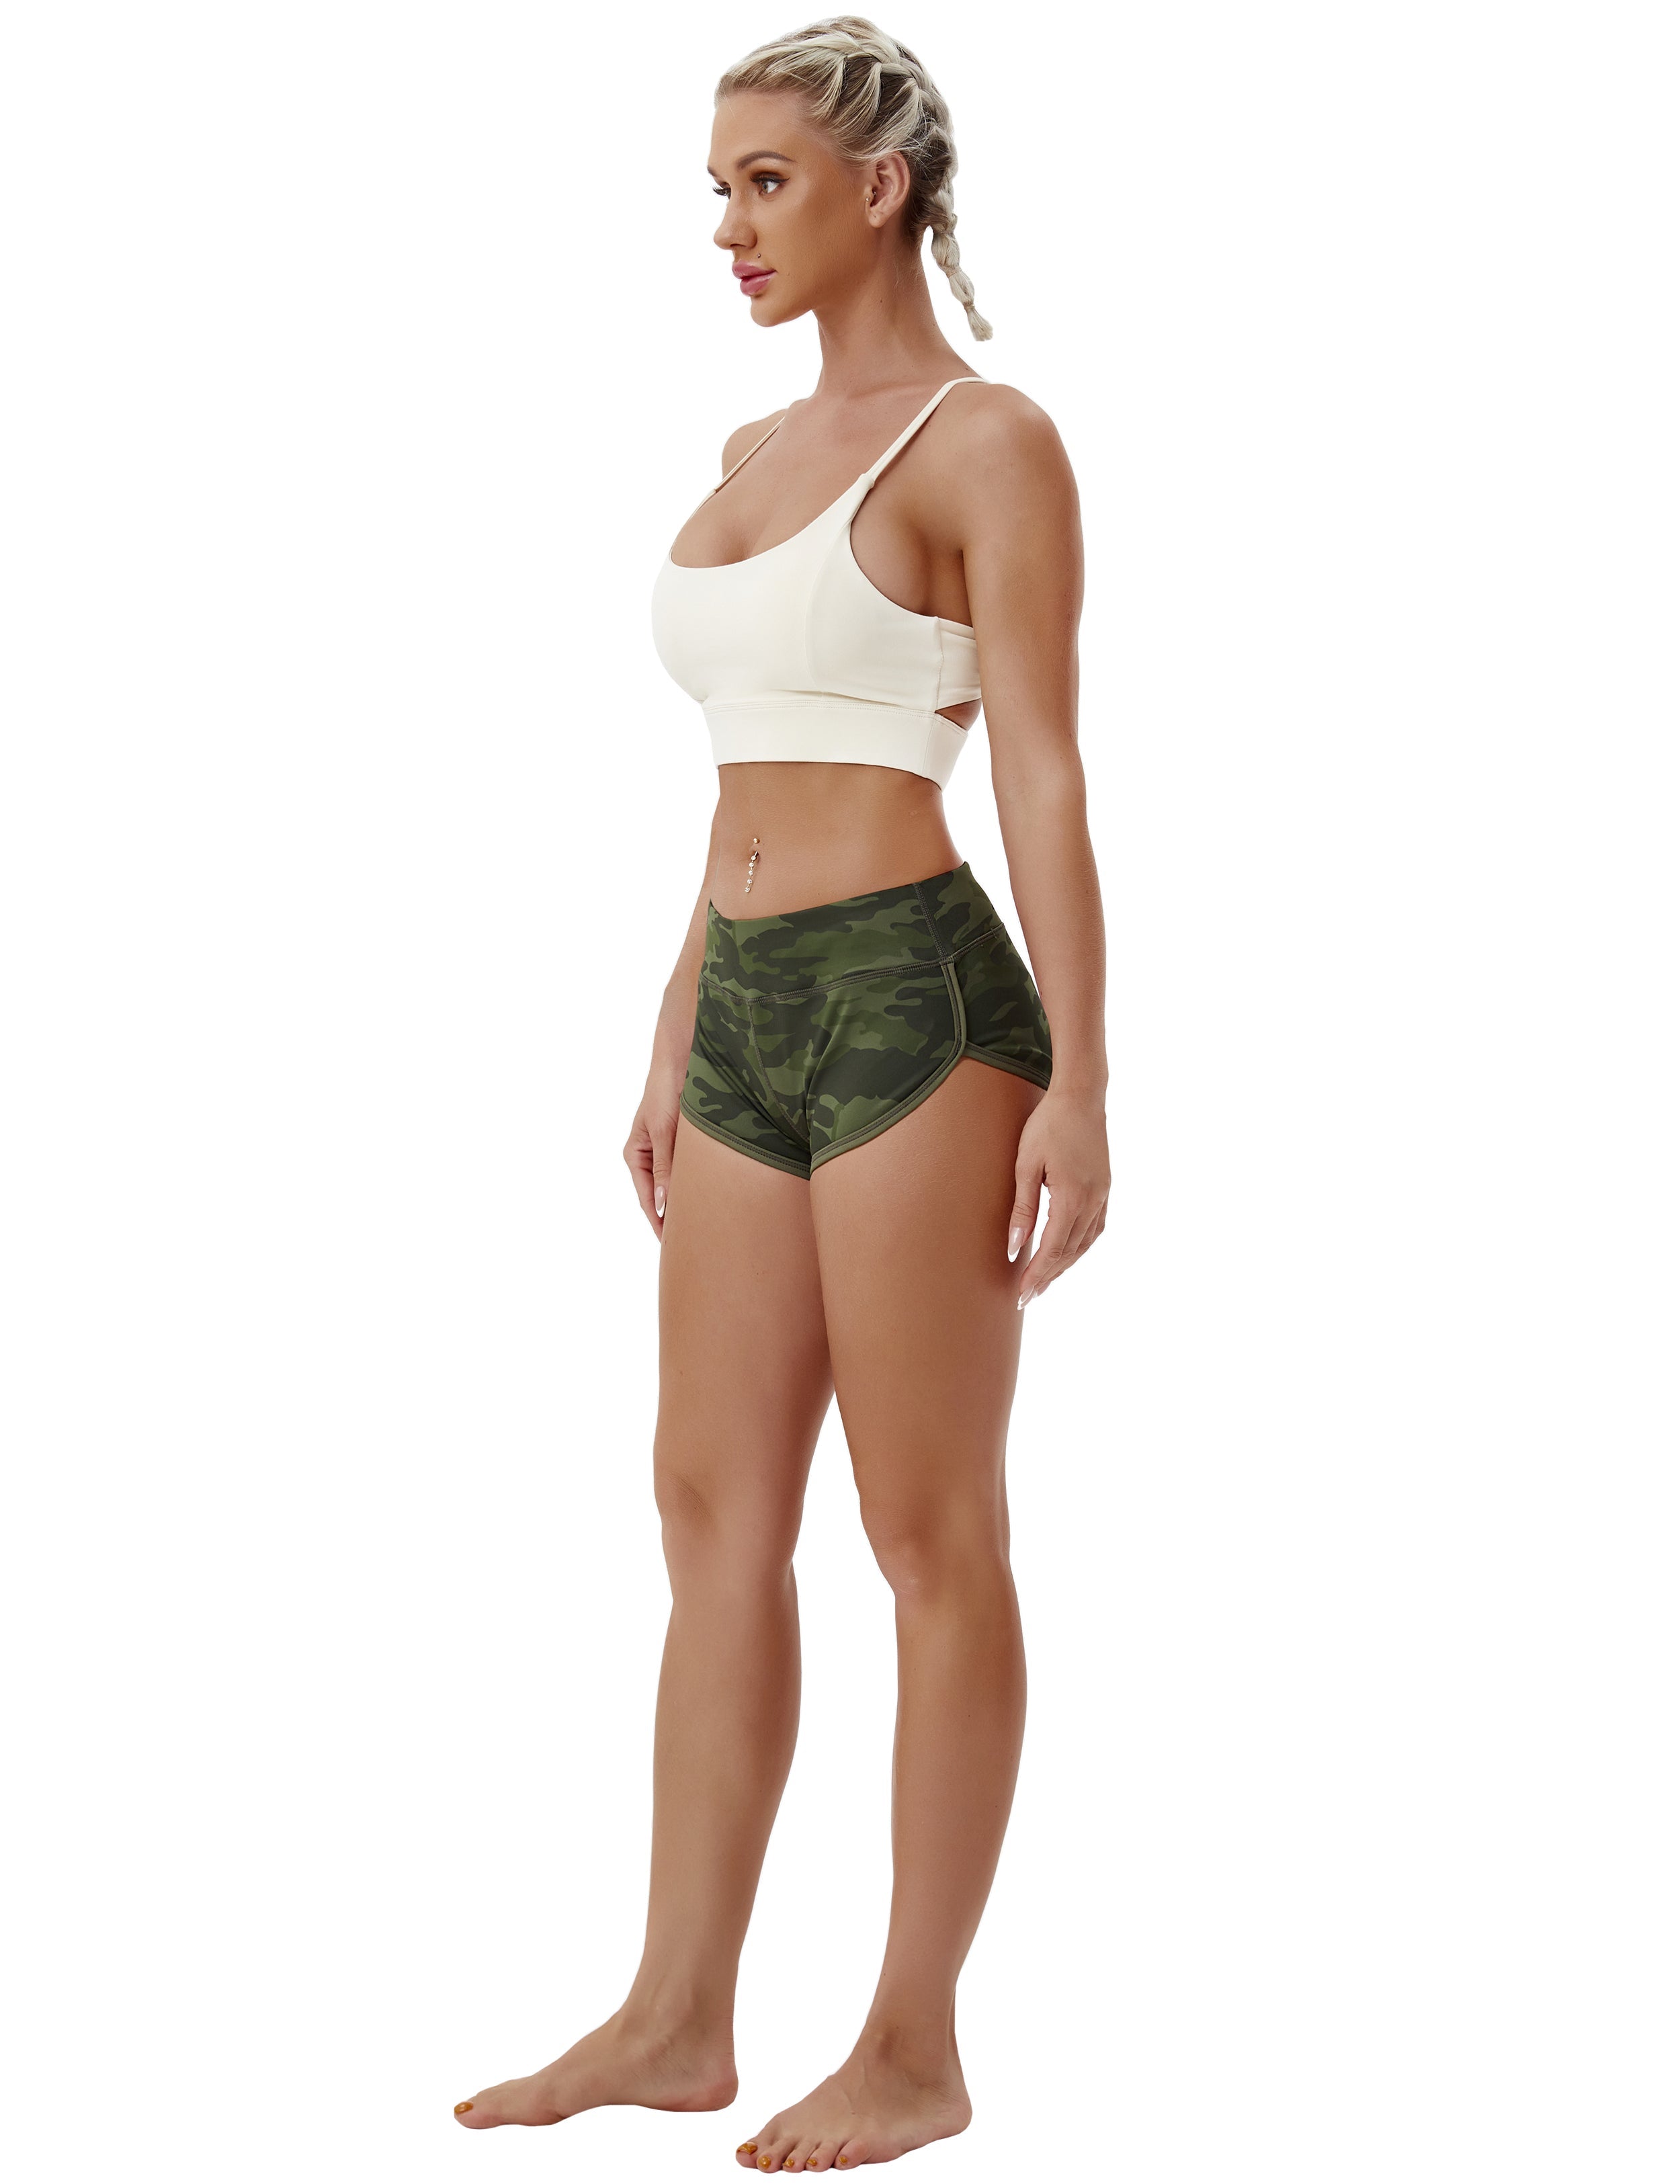 Printed Booty Tall Size Shorts green camo Sleek, soft, smooth and totally comfortable: our newest sexy style is here. Softest-ever fabric High elasticity High density 4-way stretch Fabric doesn't attract lint easily No see-through Moisture-wicking Machine wash 78% Polyester, 22% Spandex